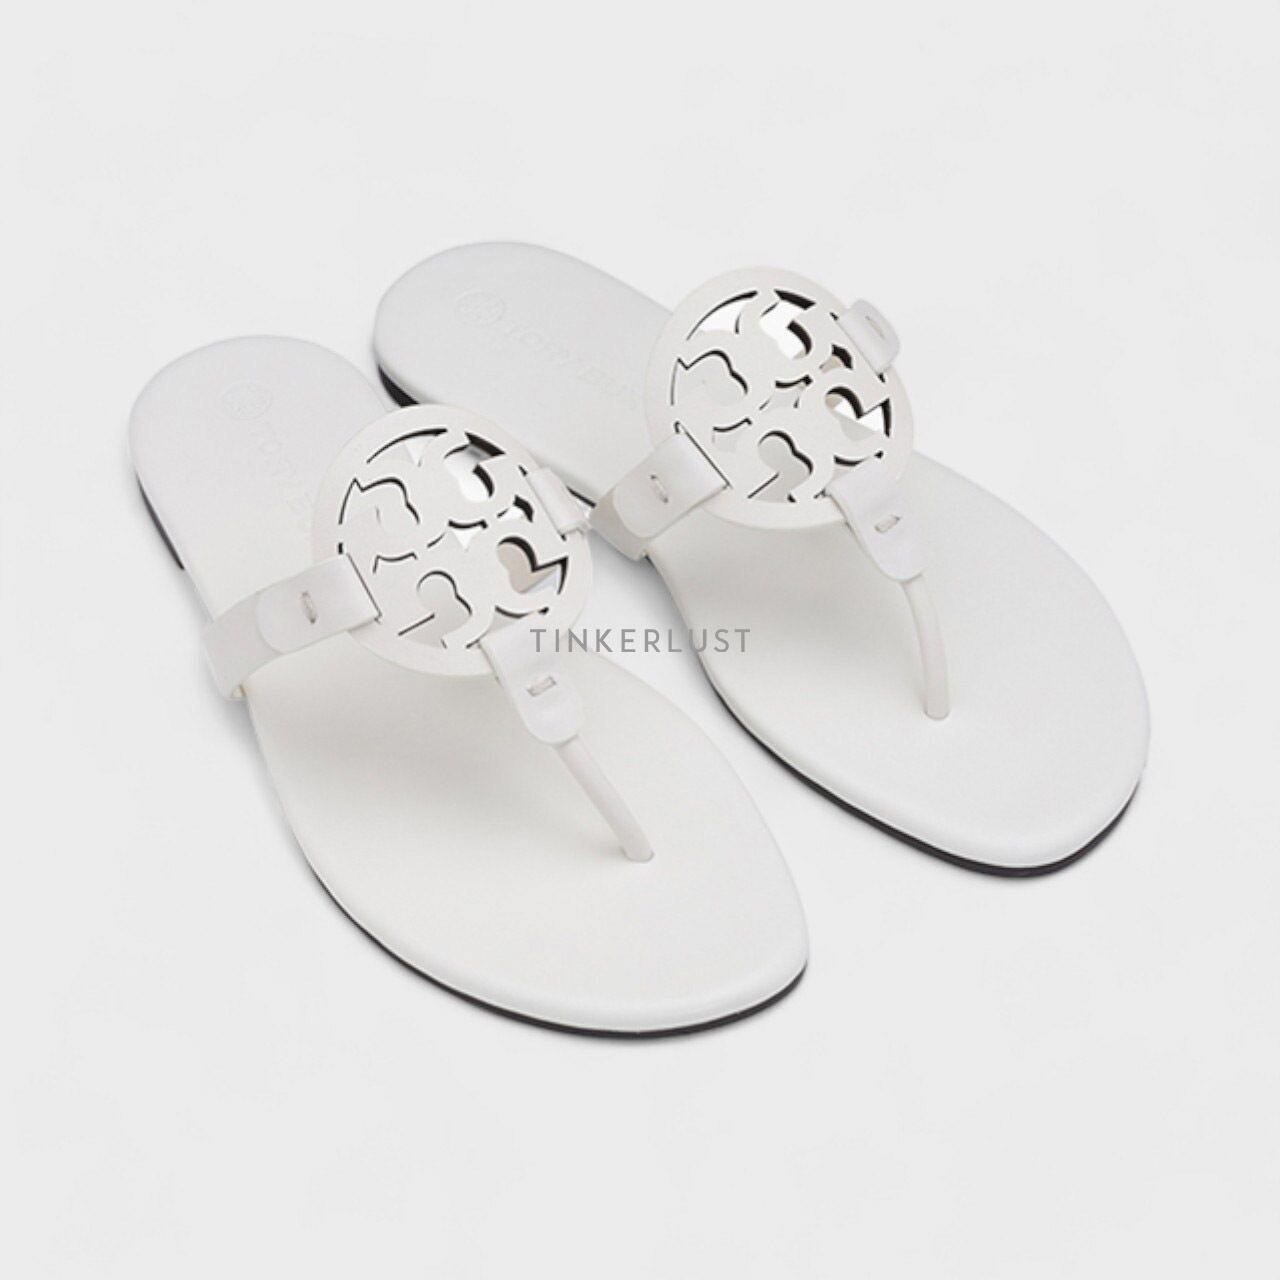 Tory Burch Women Miller in New Ivory Leather Flat Sandals